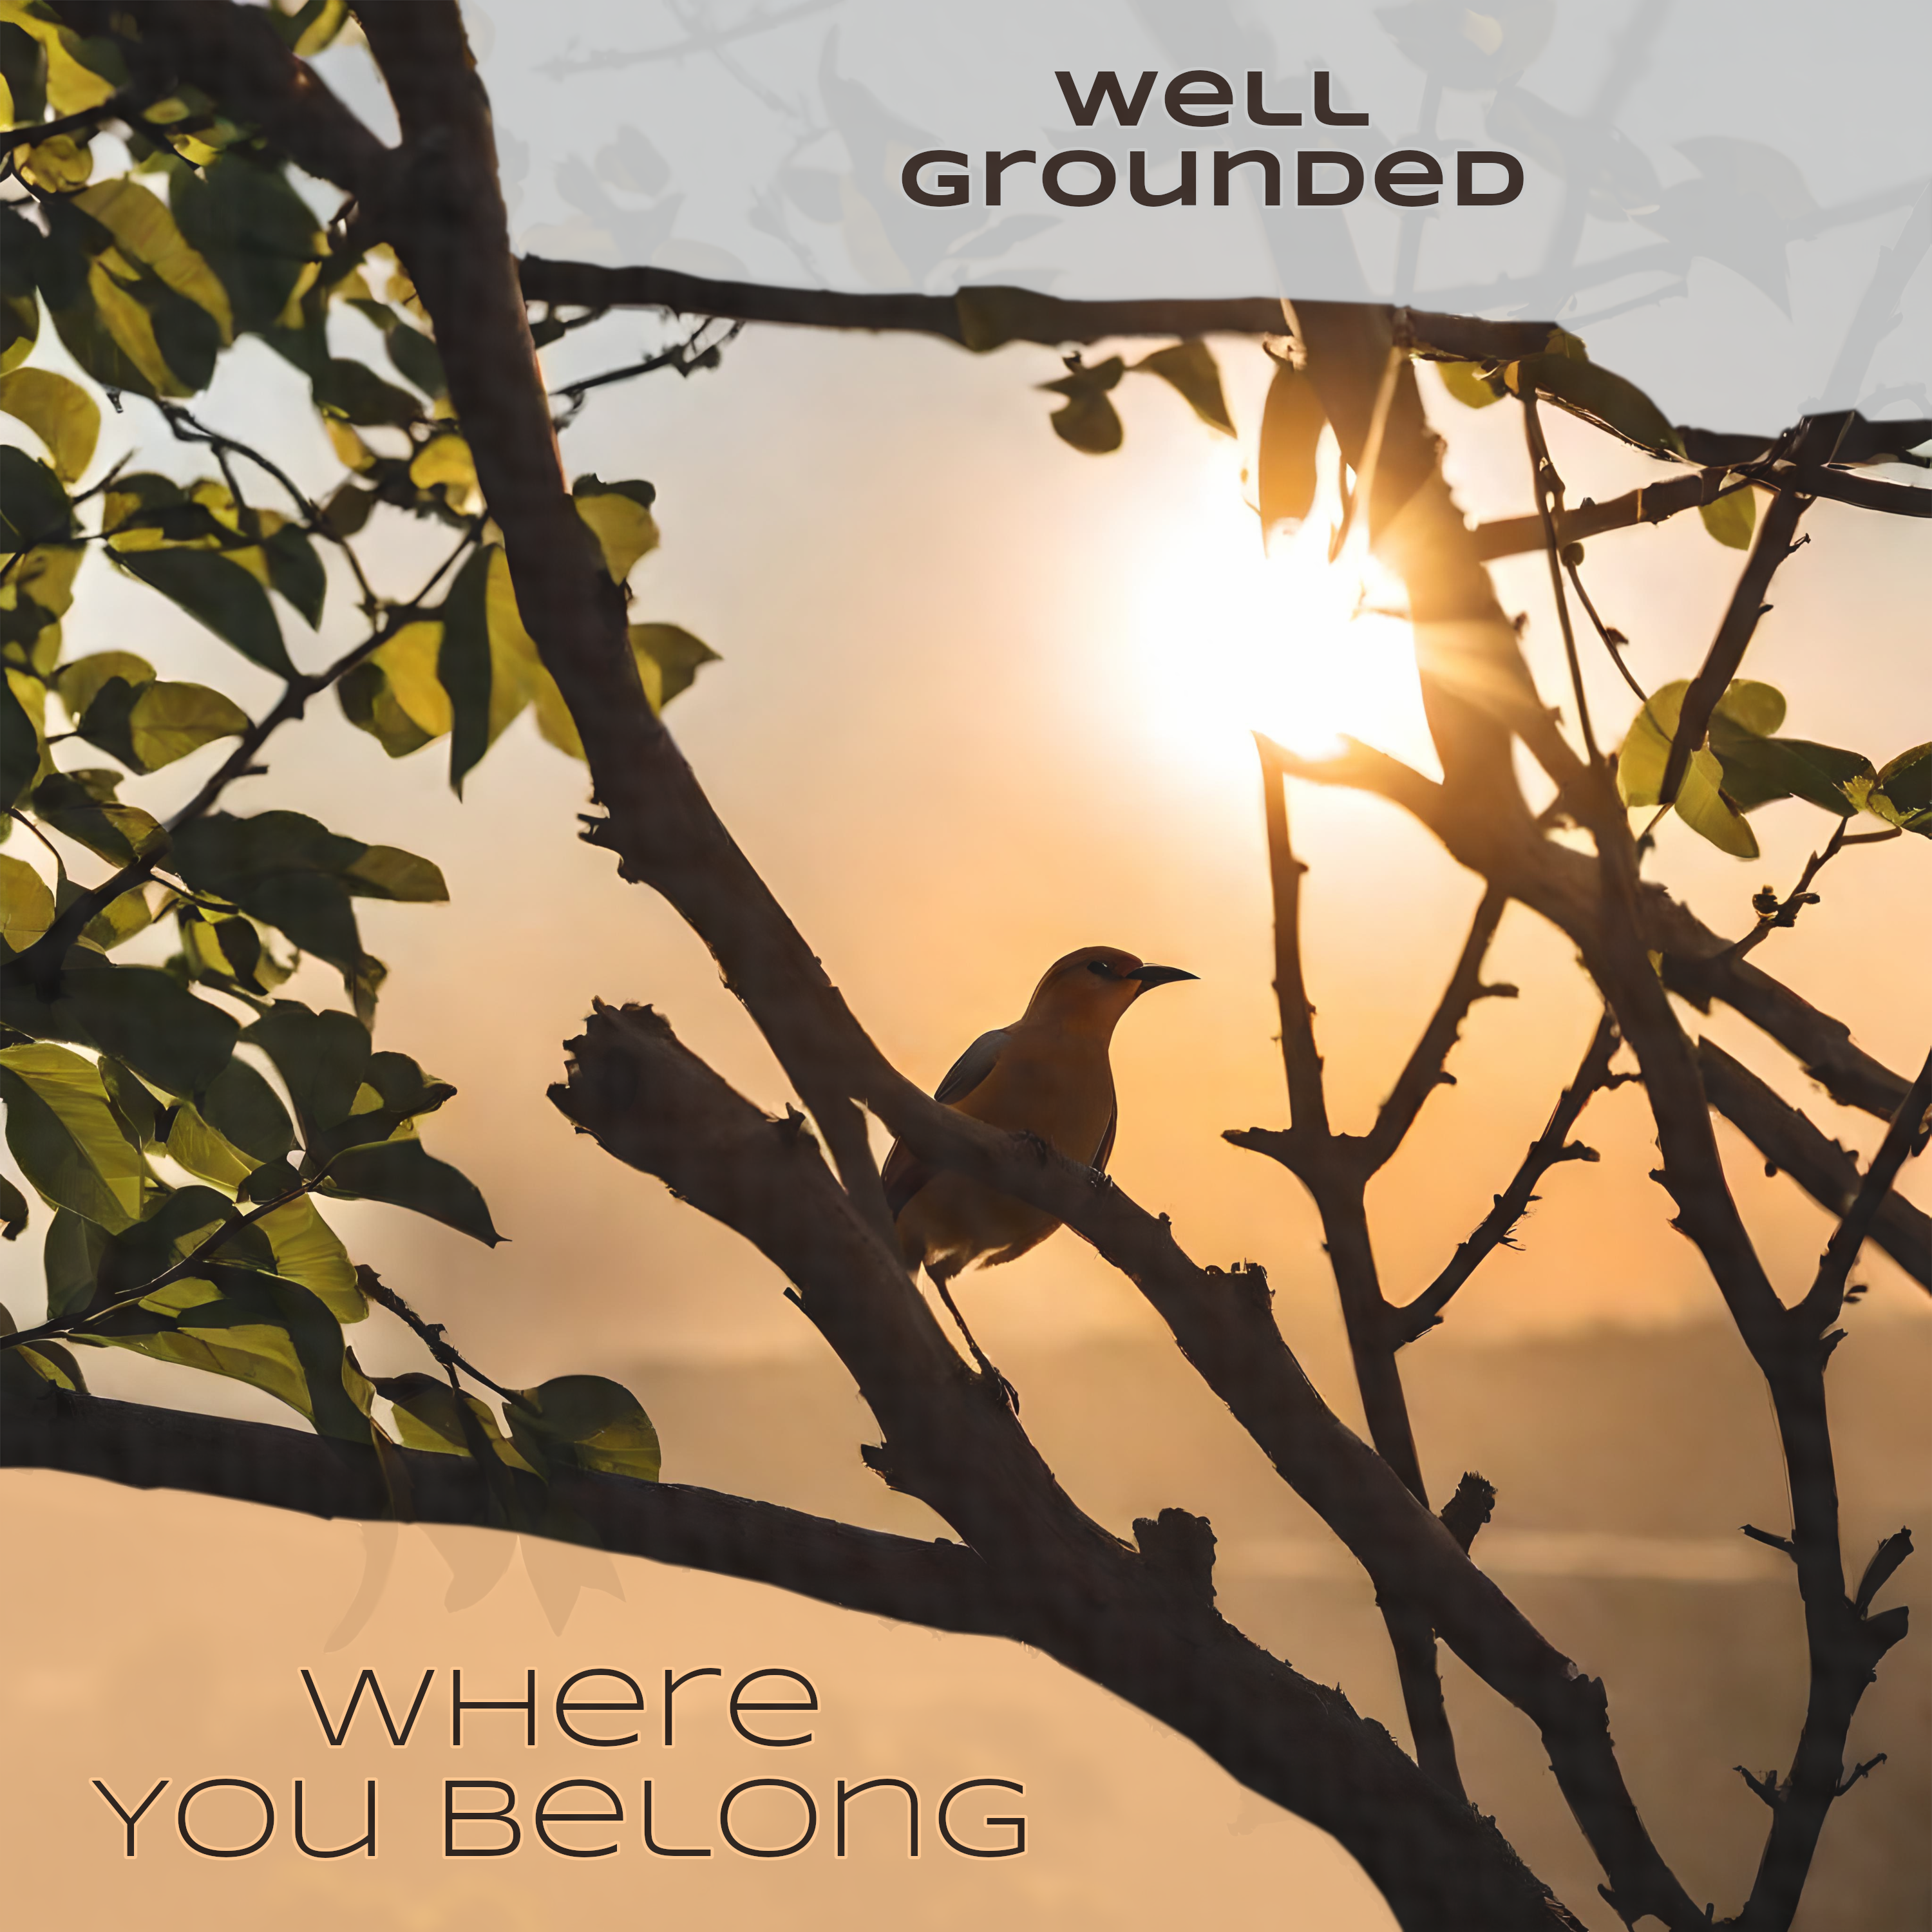 Cover art for 'Where You Belong' by Well Grounded a reggae cover of Little Dragon's 'Where You Belong'.